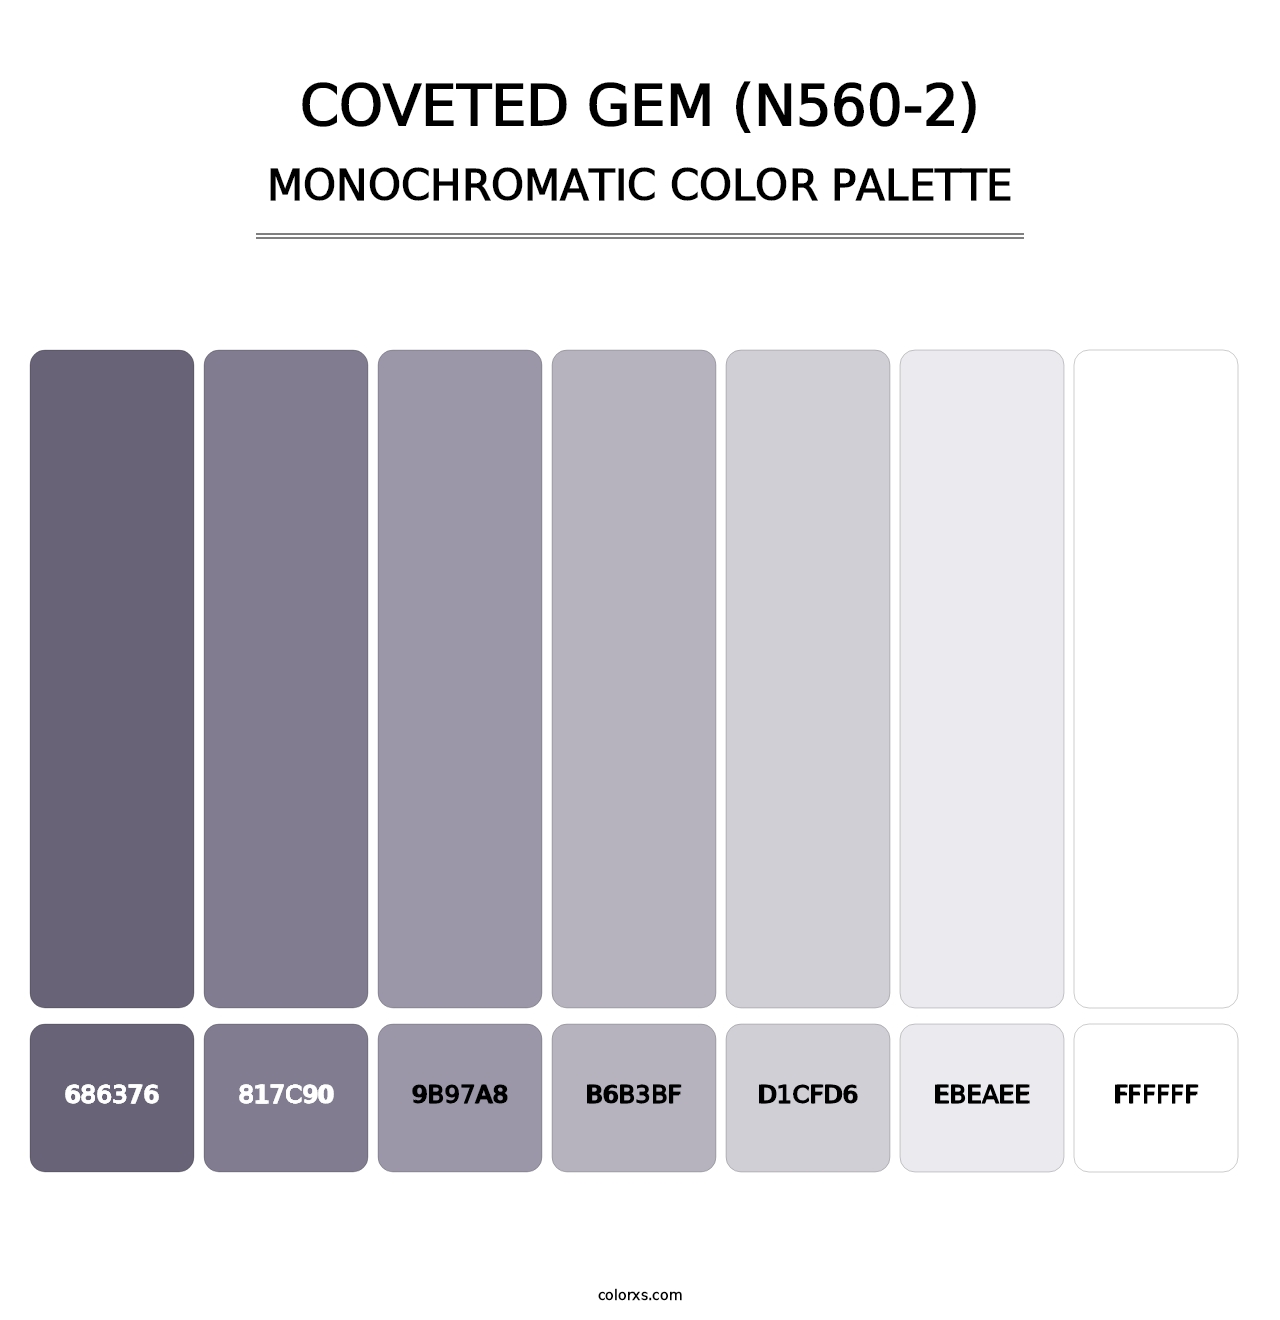 Coveted Gem (N560-2) - Monochromatic Color Palette